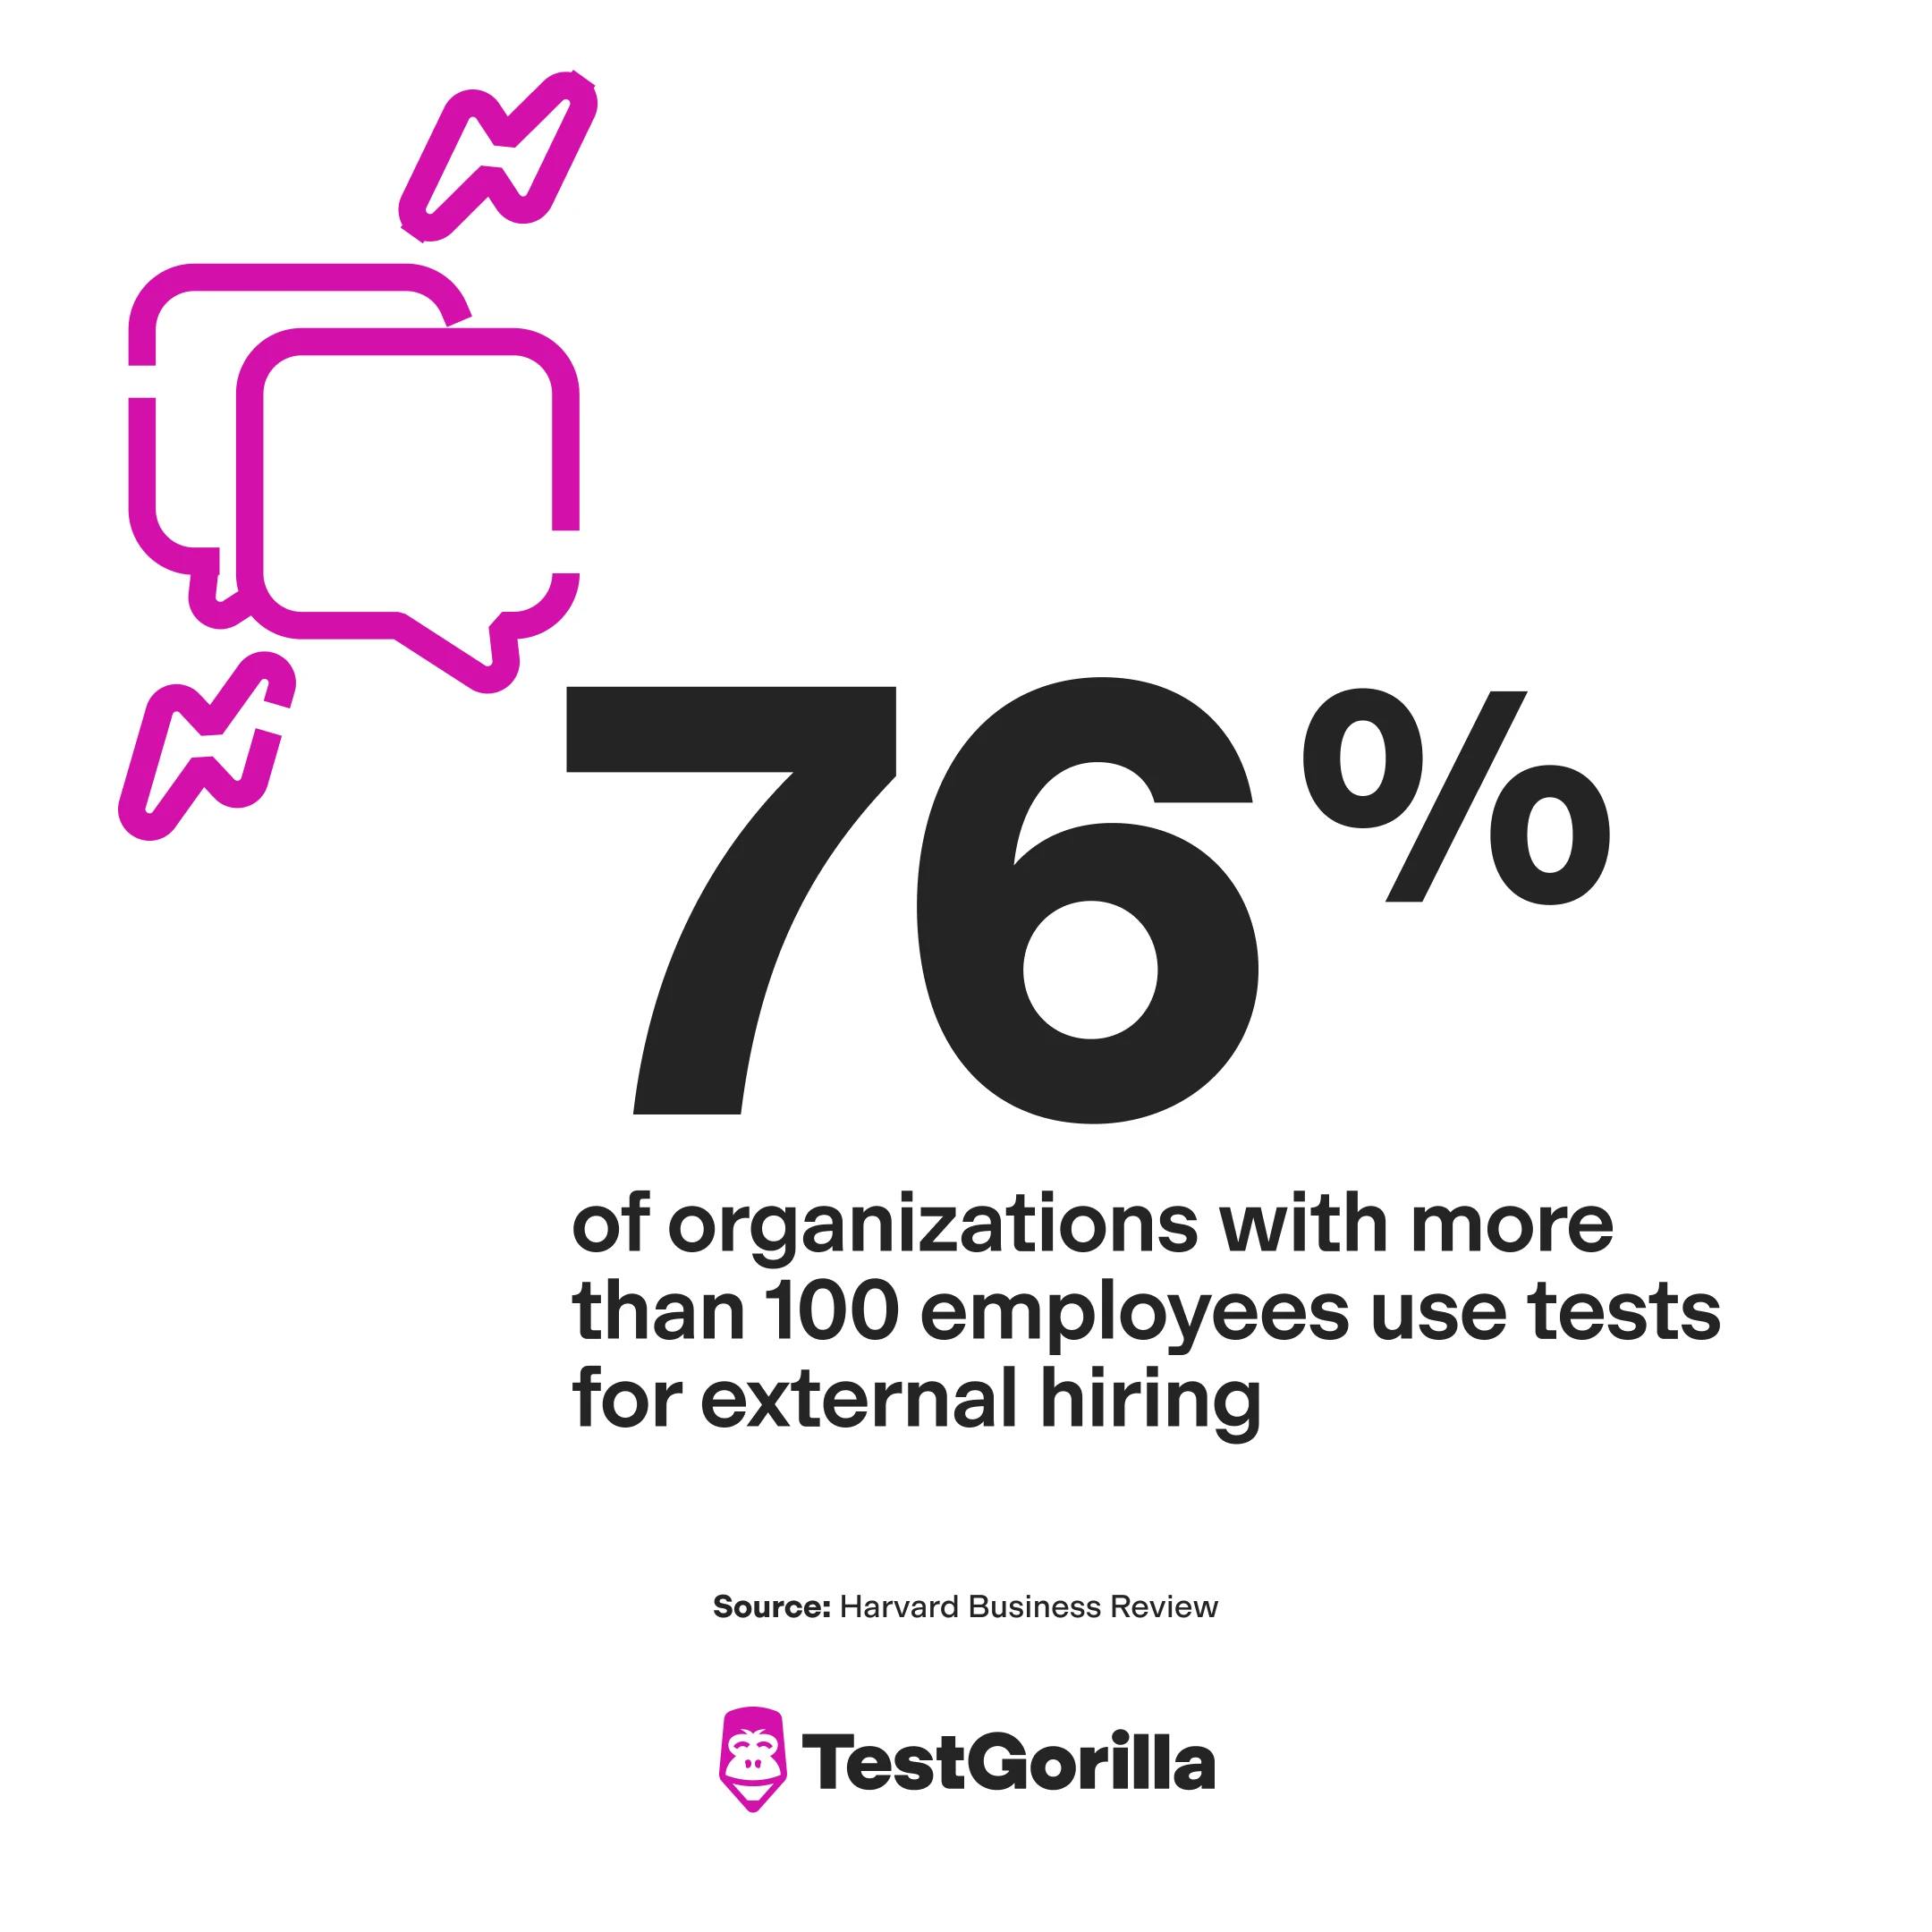 76% of organizations with more than 100 employees now use skills tests for external hiring